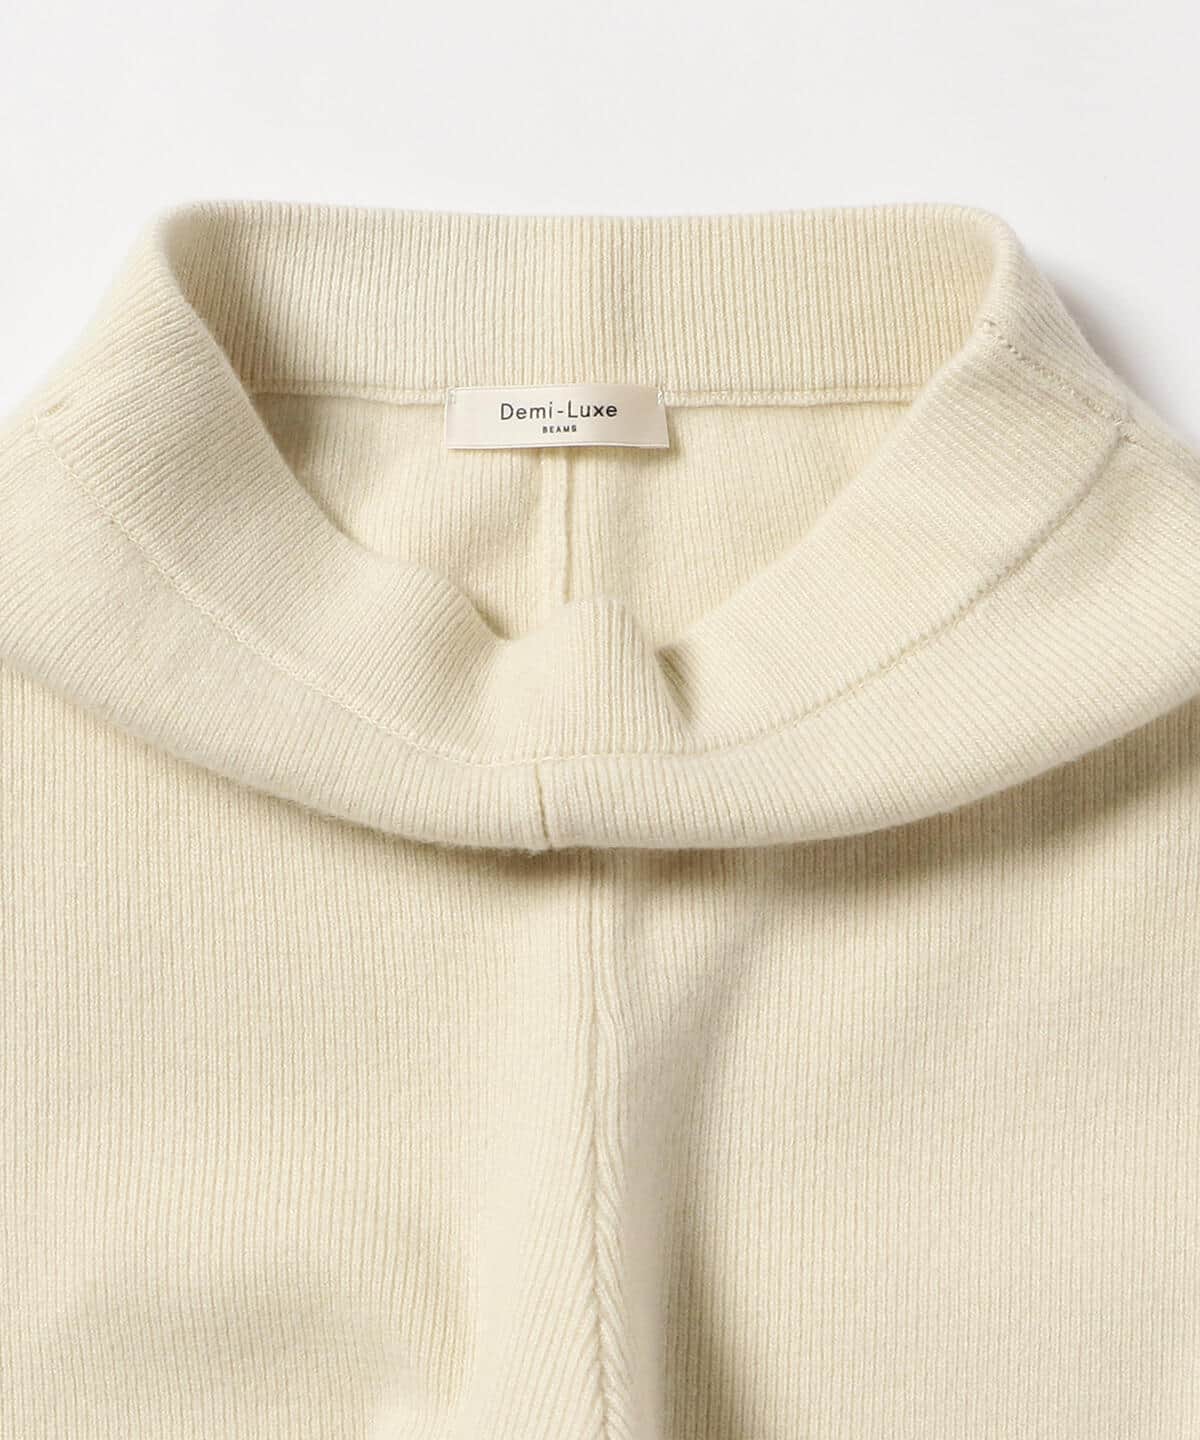 Demi-Luxe BEAMS Demi-Luxe BEAMS Demi-Luxe BEAMS / wool cashmere